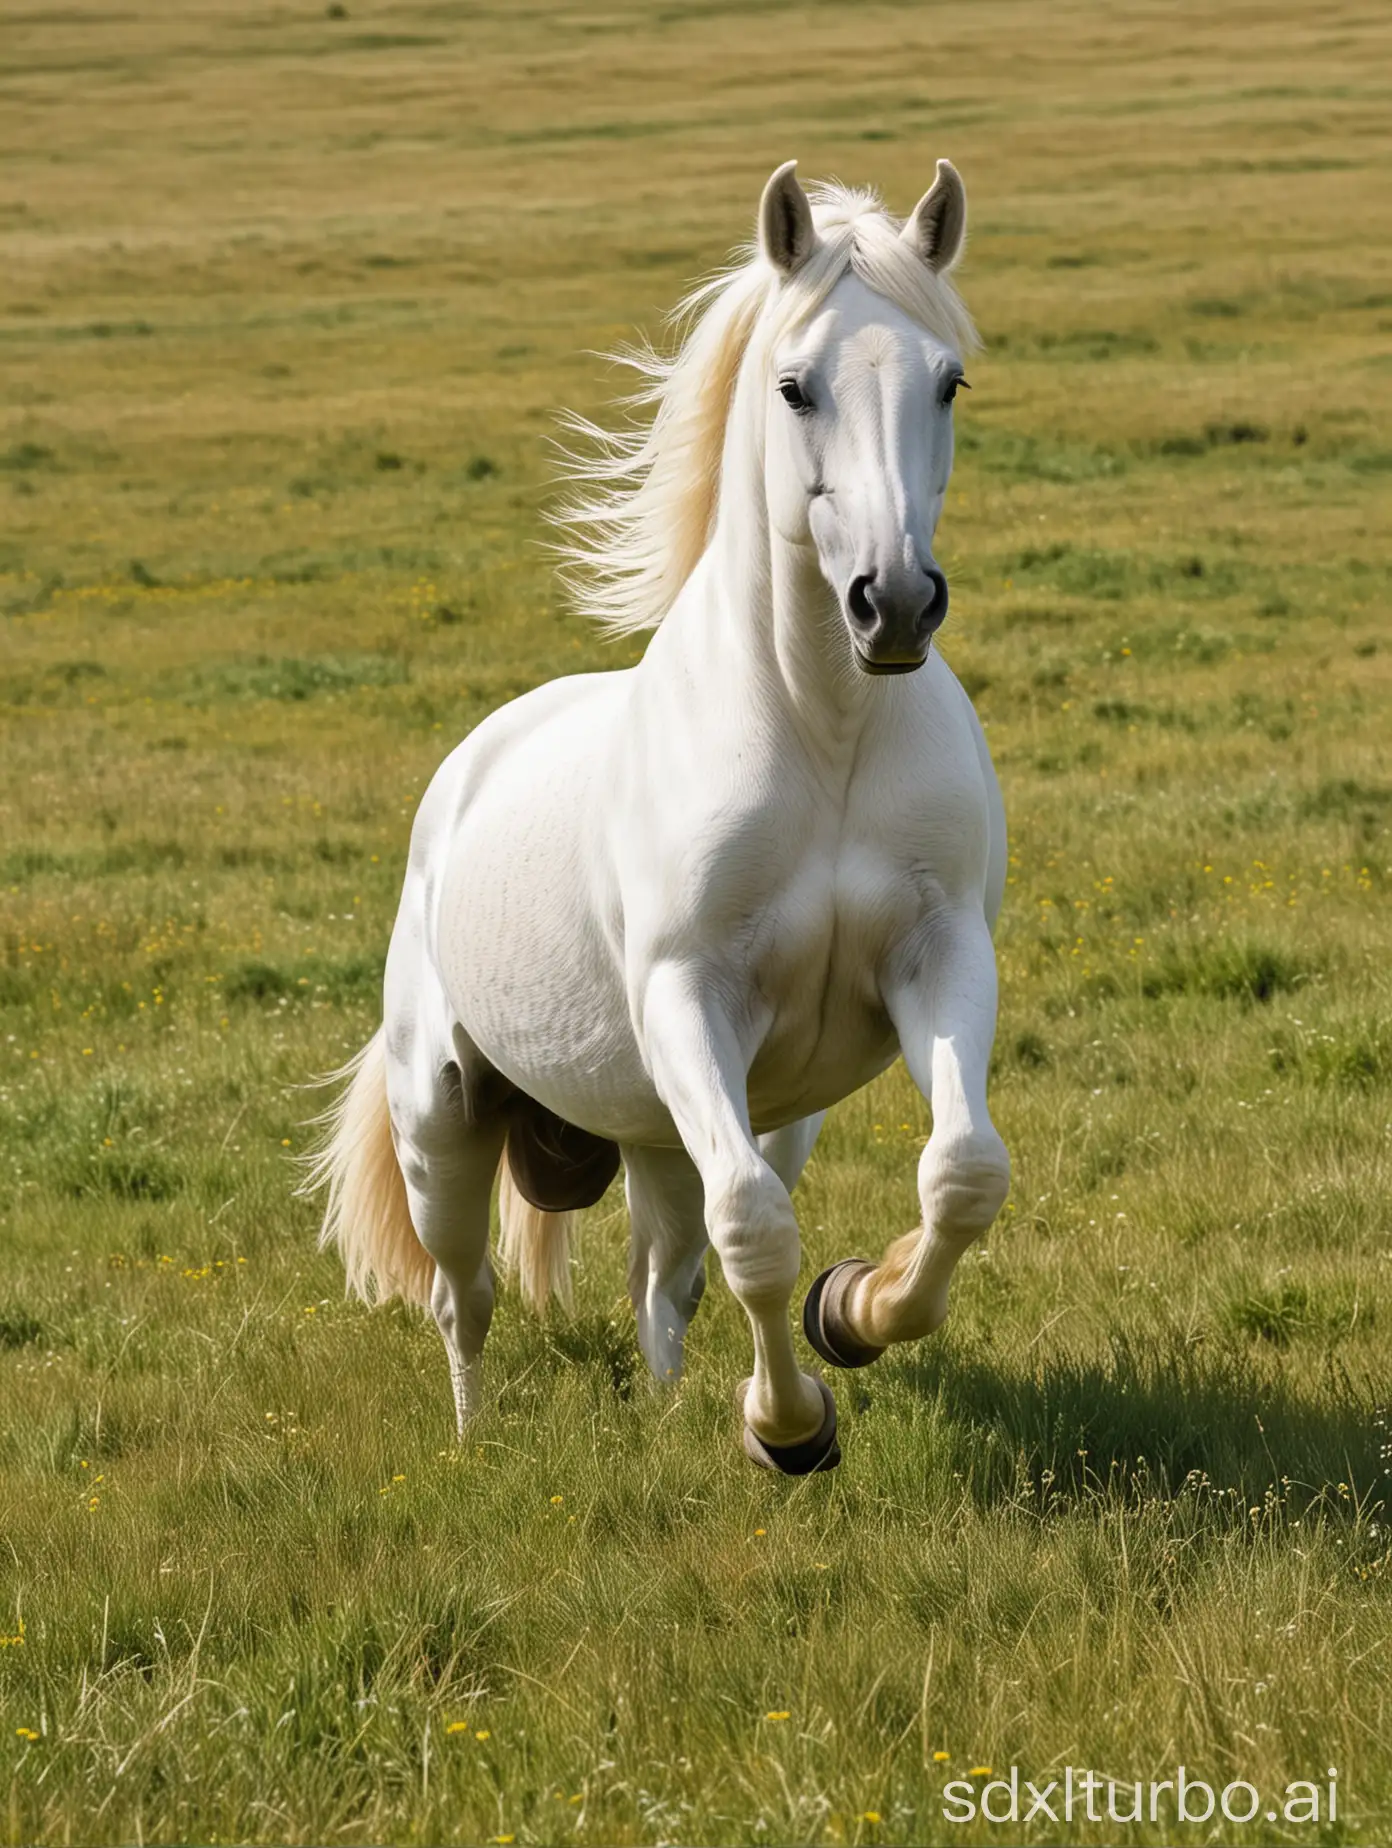 Graceful-White-Horse-Resting-and-Galloping-on-Verdant-Grassland